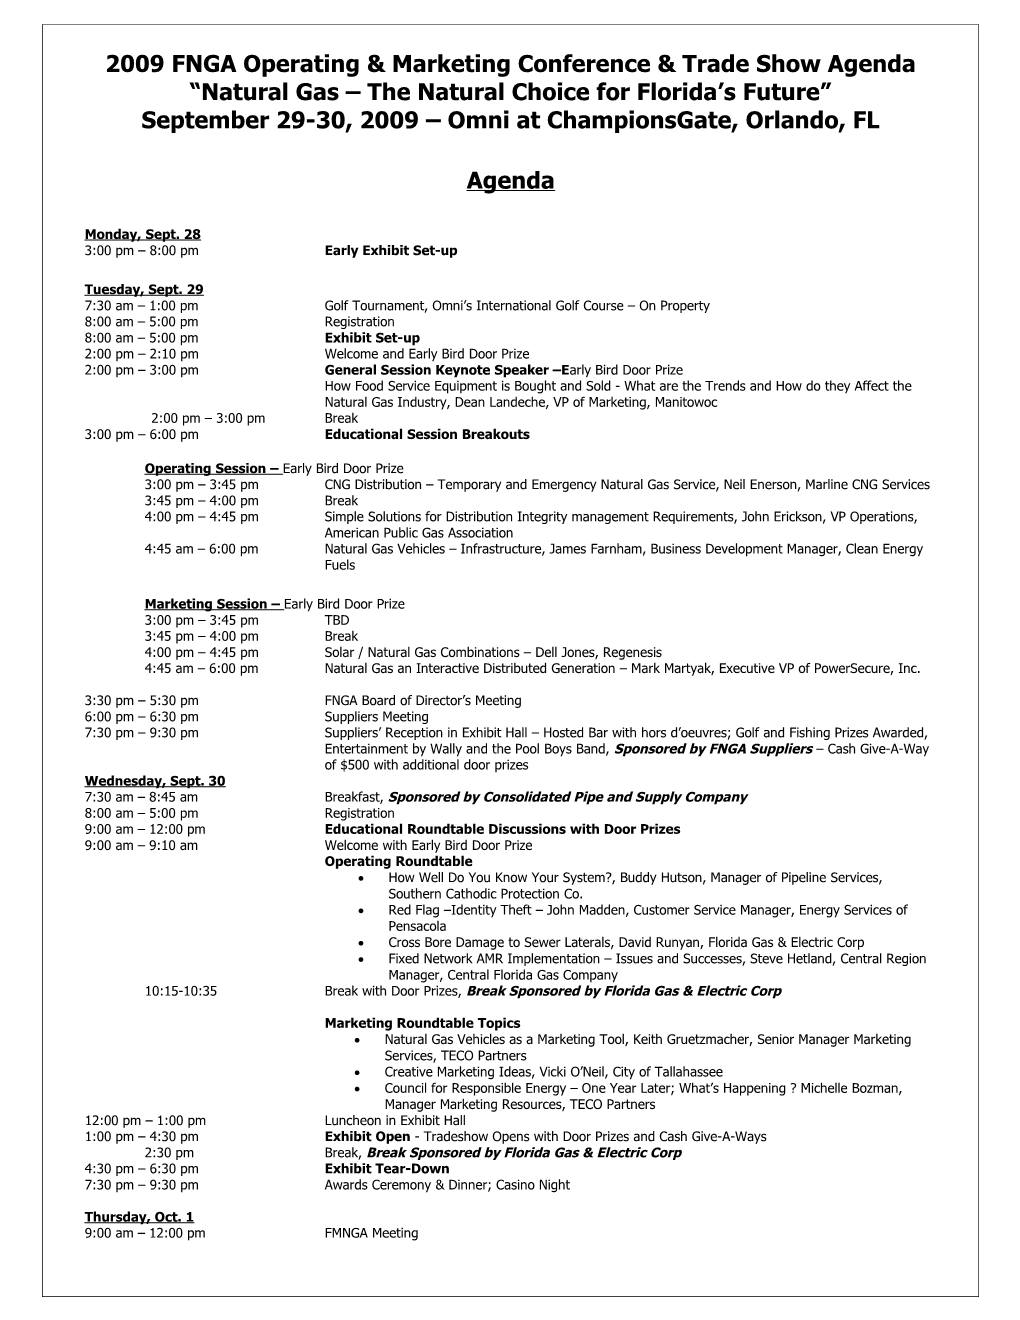 2003 FNGA Marketing & Operating Conference & Trade Show